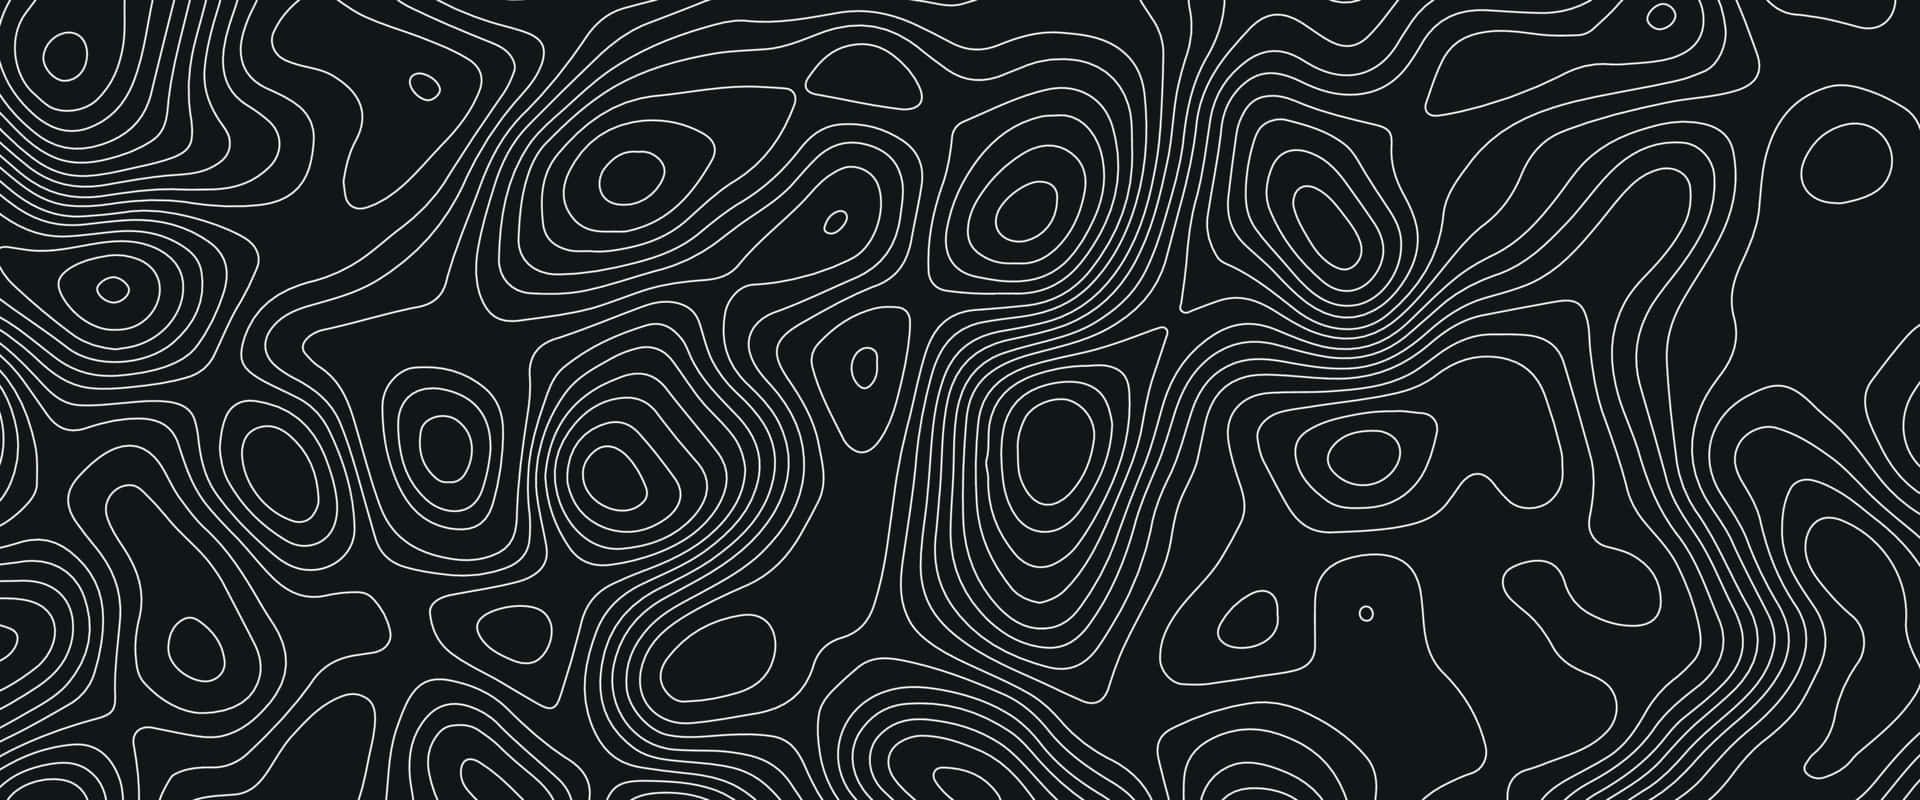 Abstract Blackand White Topographic Lines Wallpaper